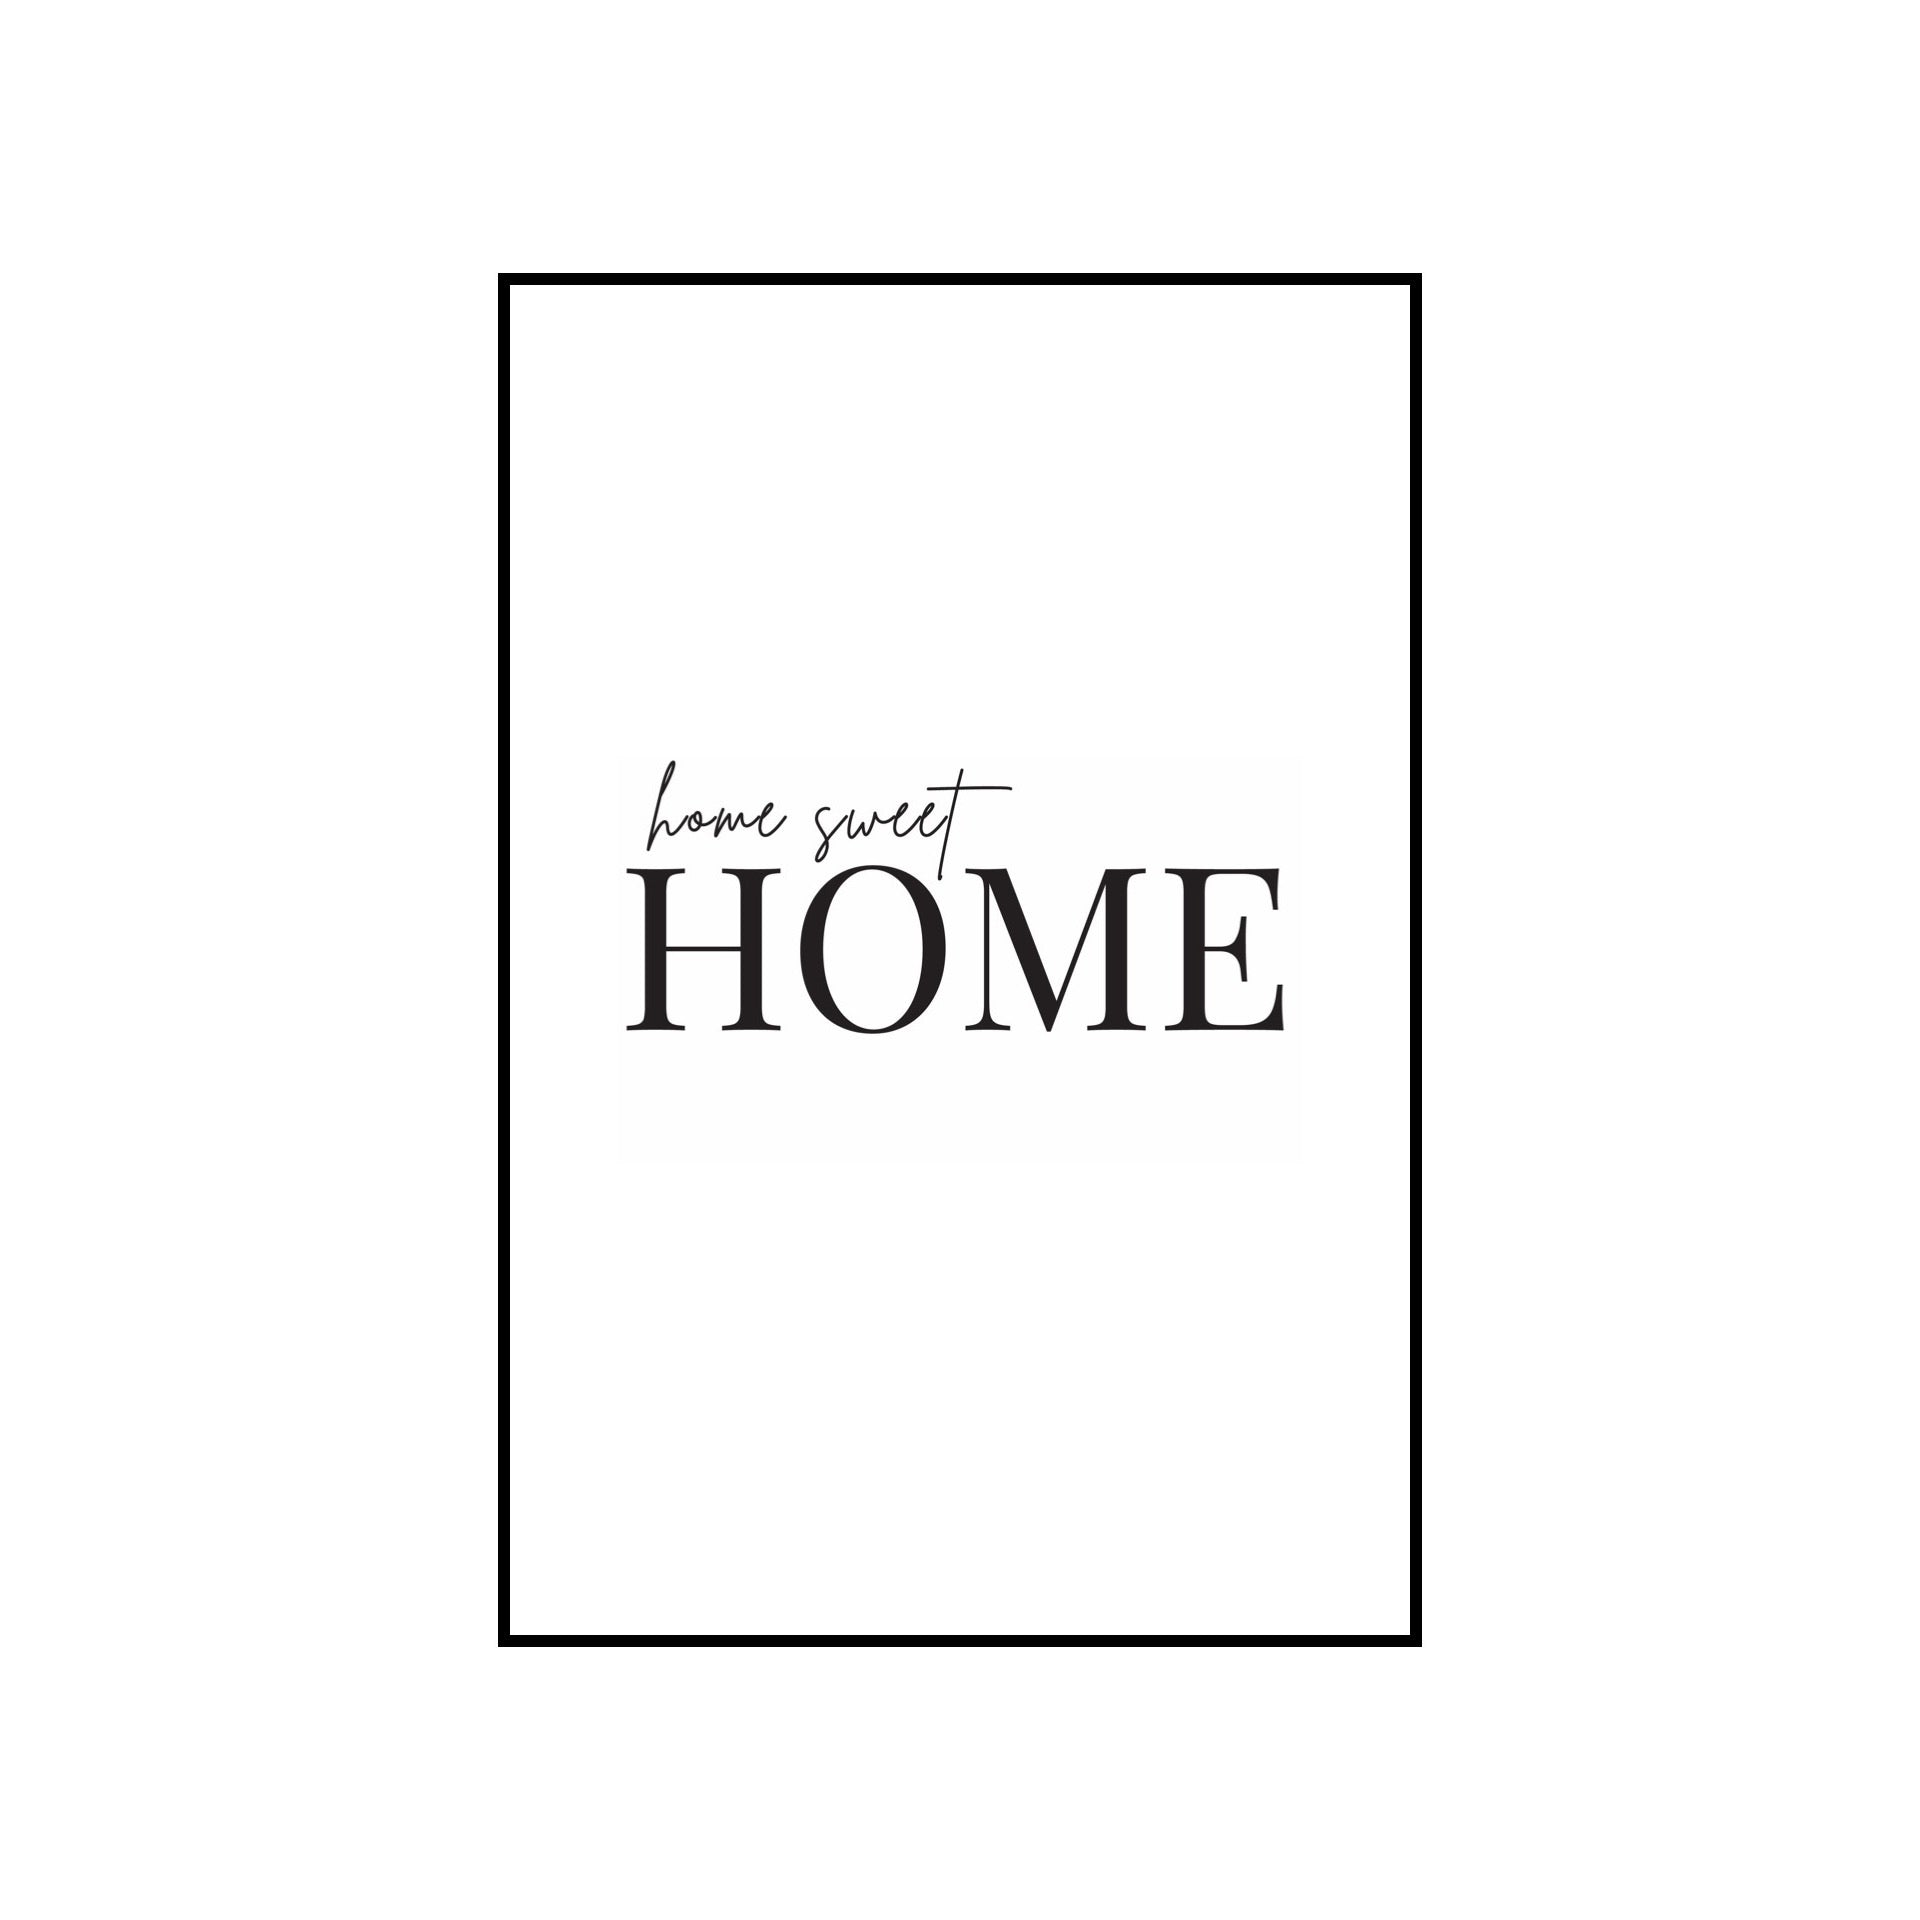 Home sweet home - THE WALL STYLIST